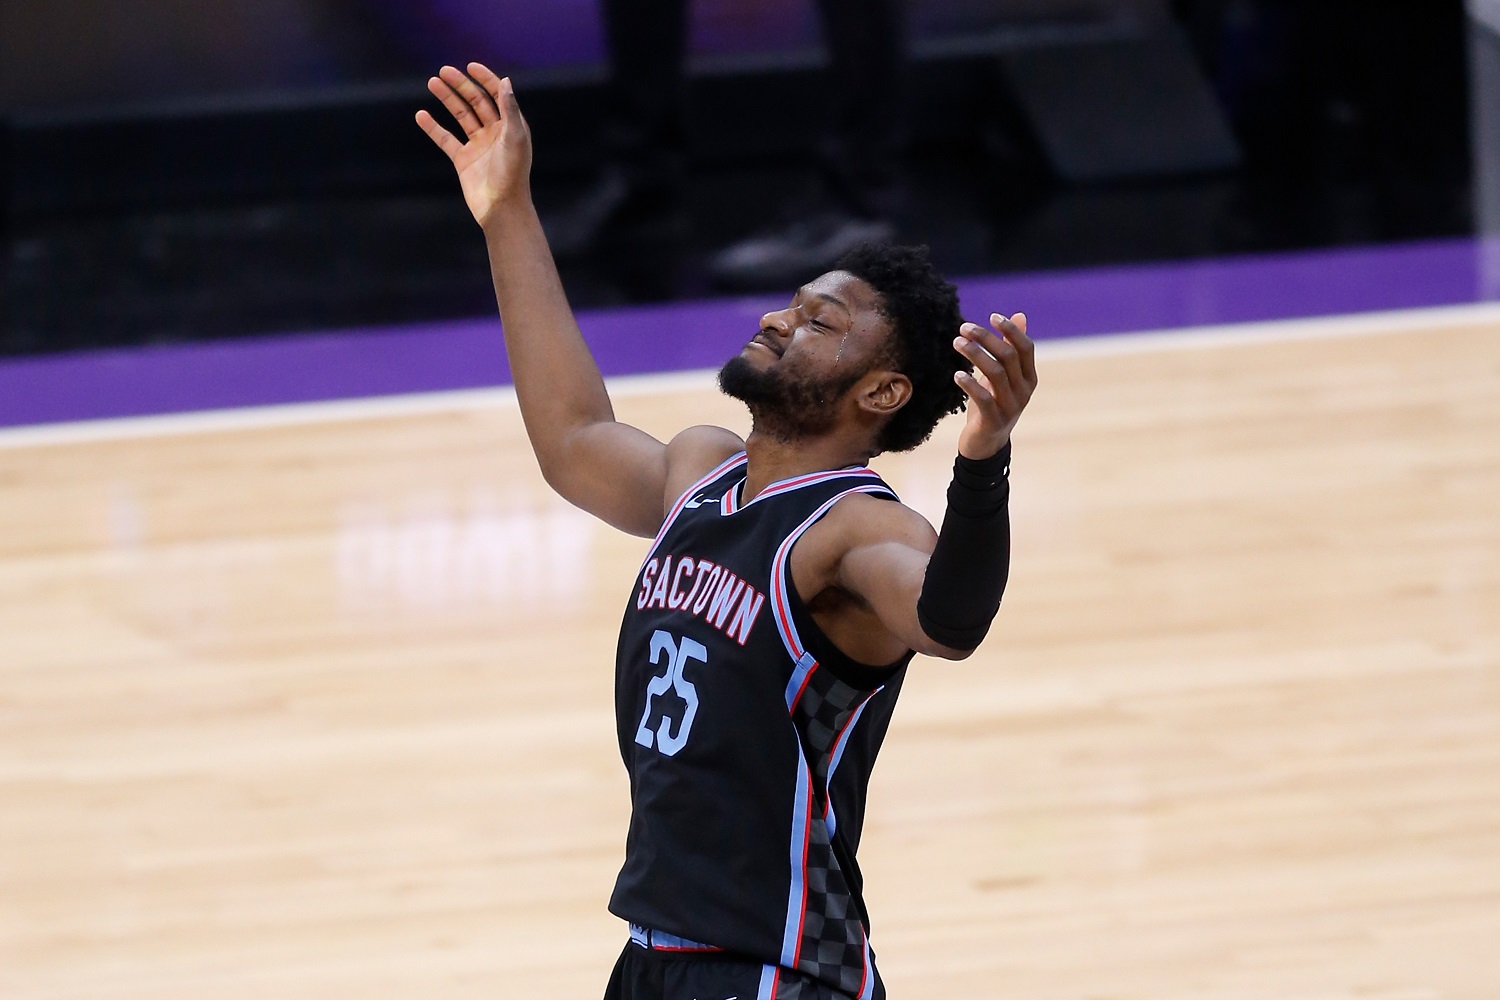 Chimezie Metu of the Sacramento Kings reacts to a play against the Oklahoma City Thunder during a game May 11, 2021 in Sacramento, California.